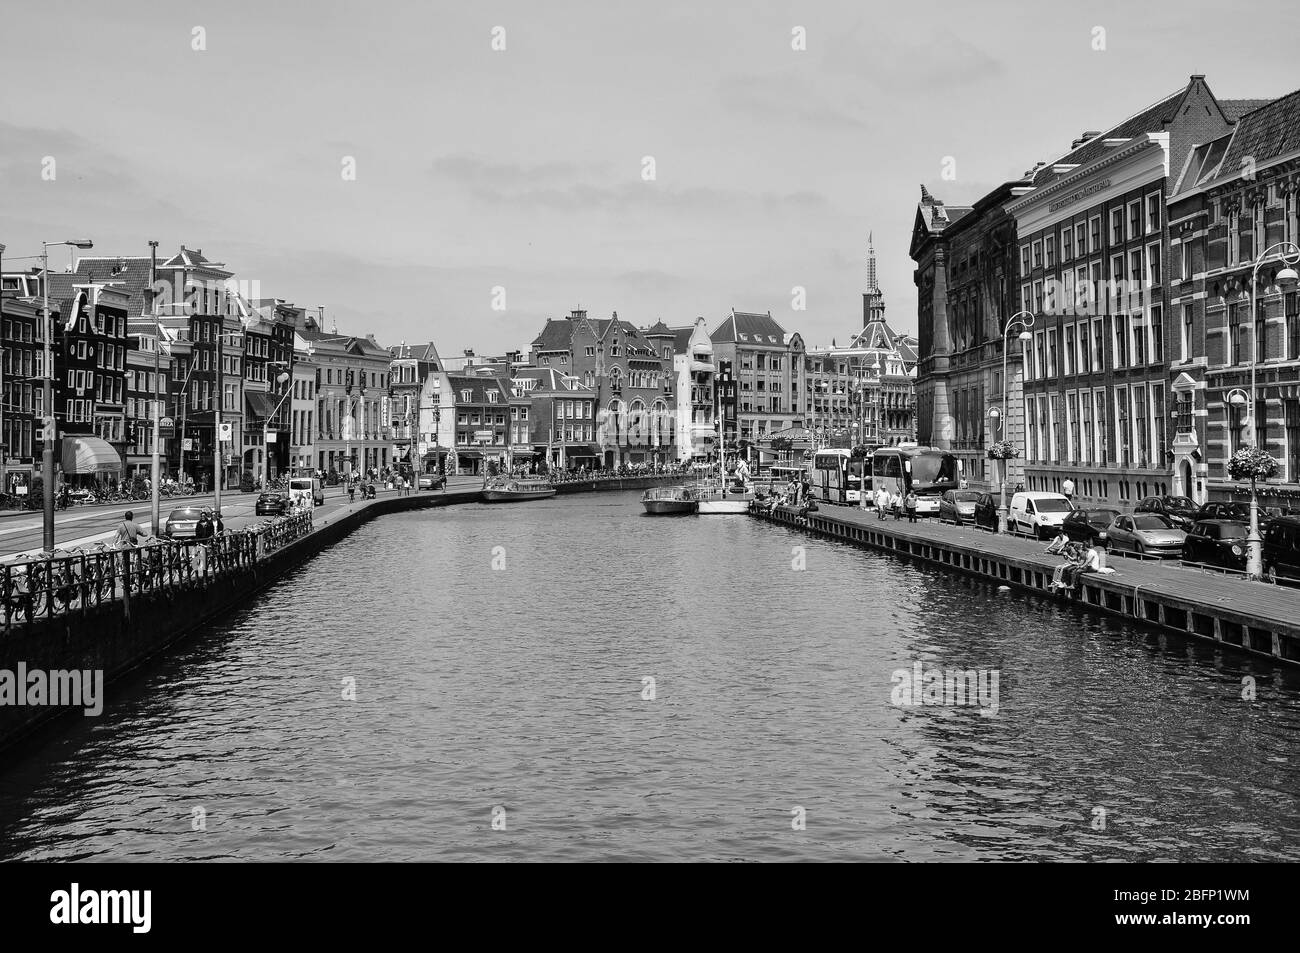 Canals and waterways of Amsterdam Stock Photo